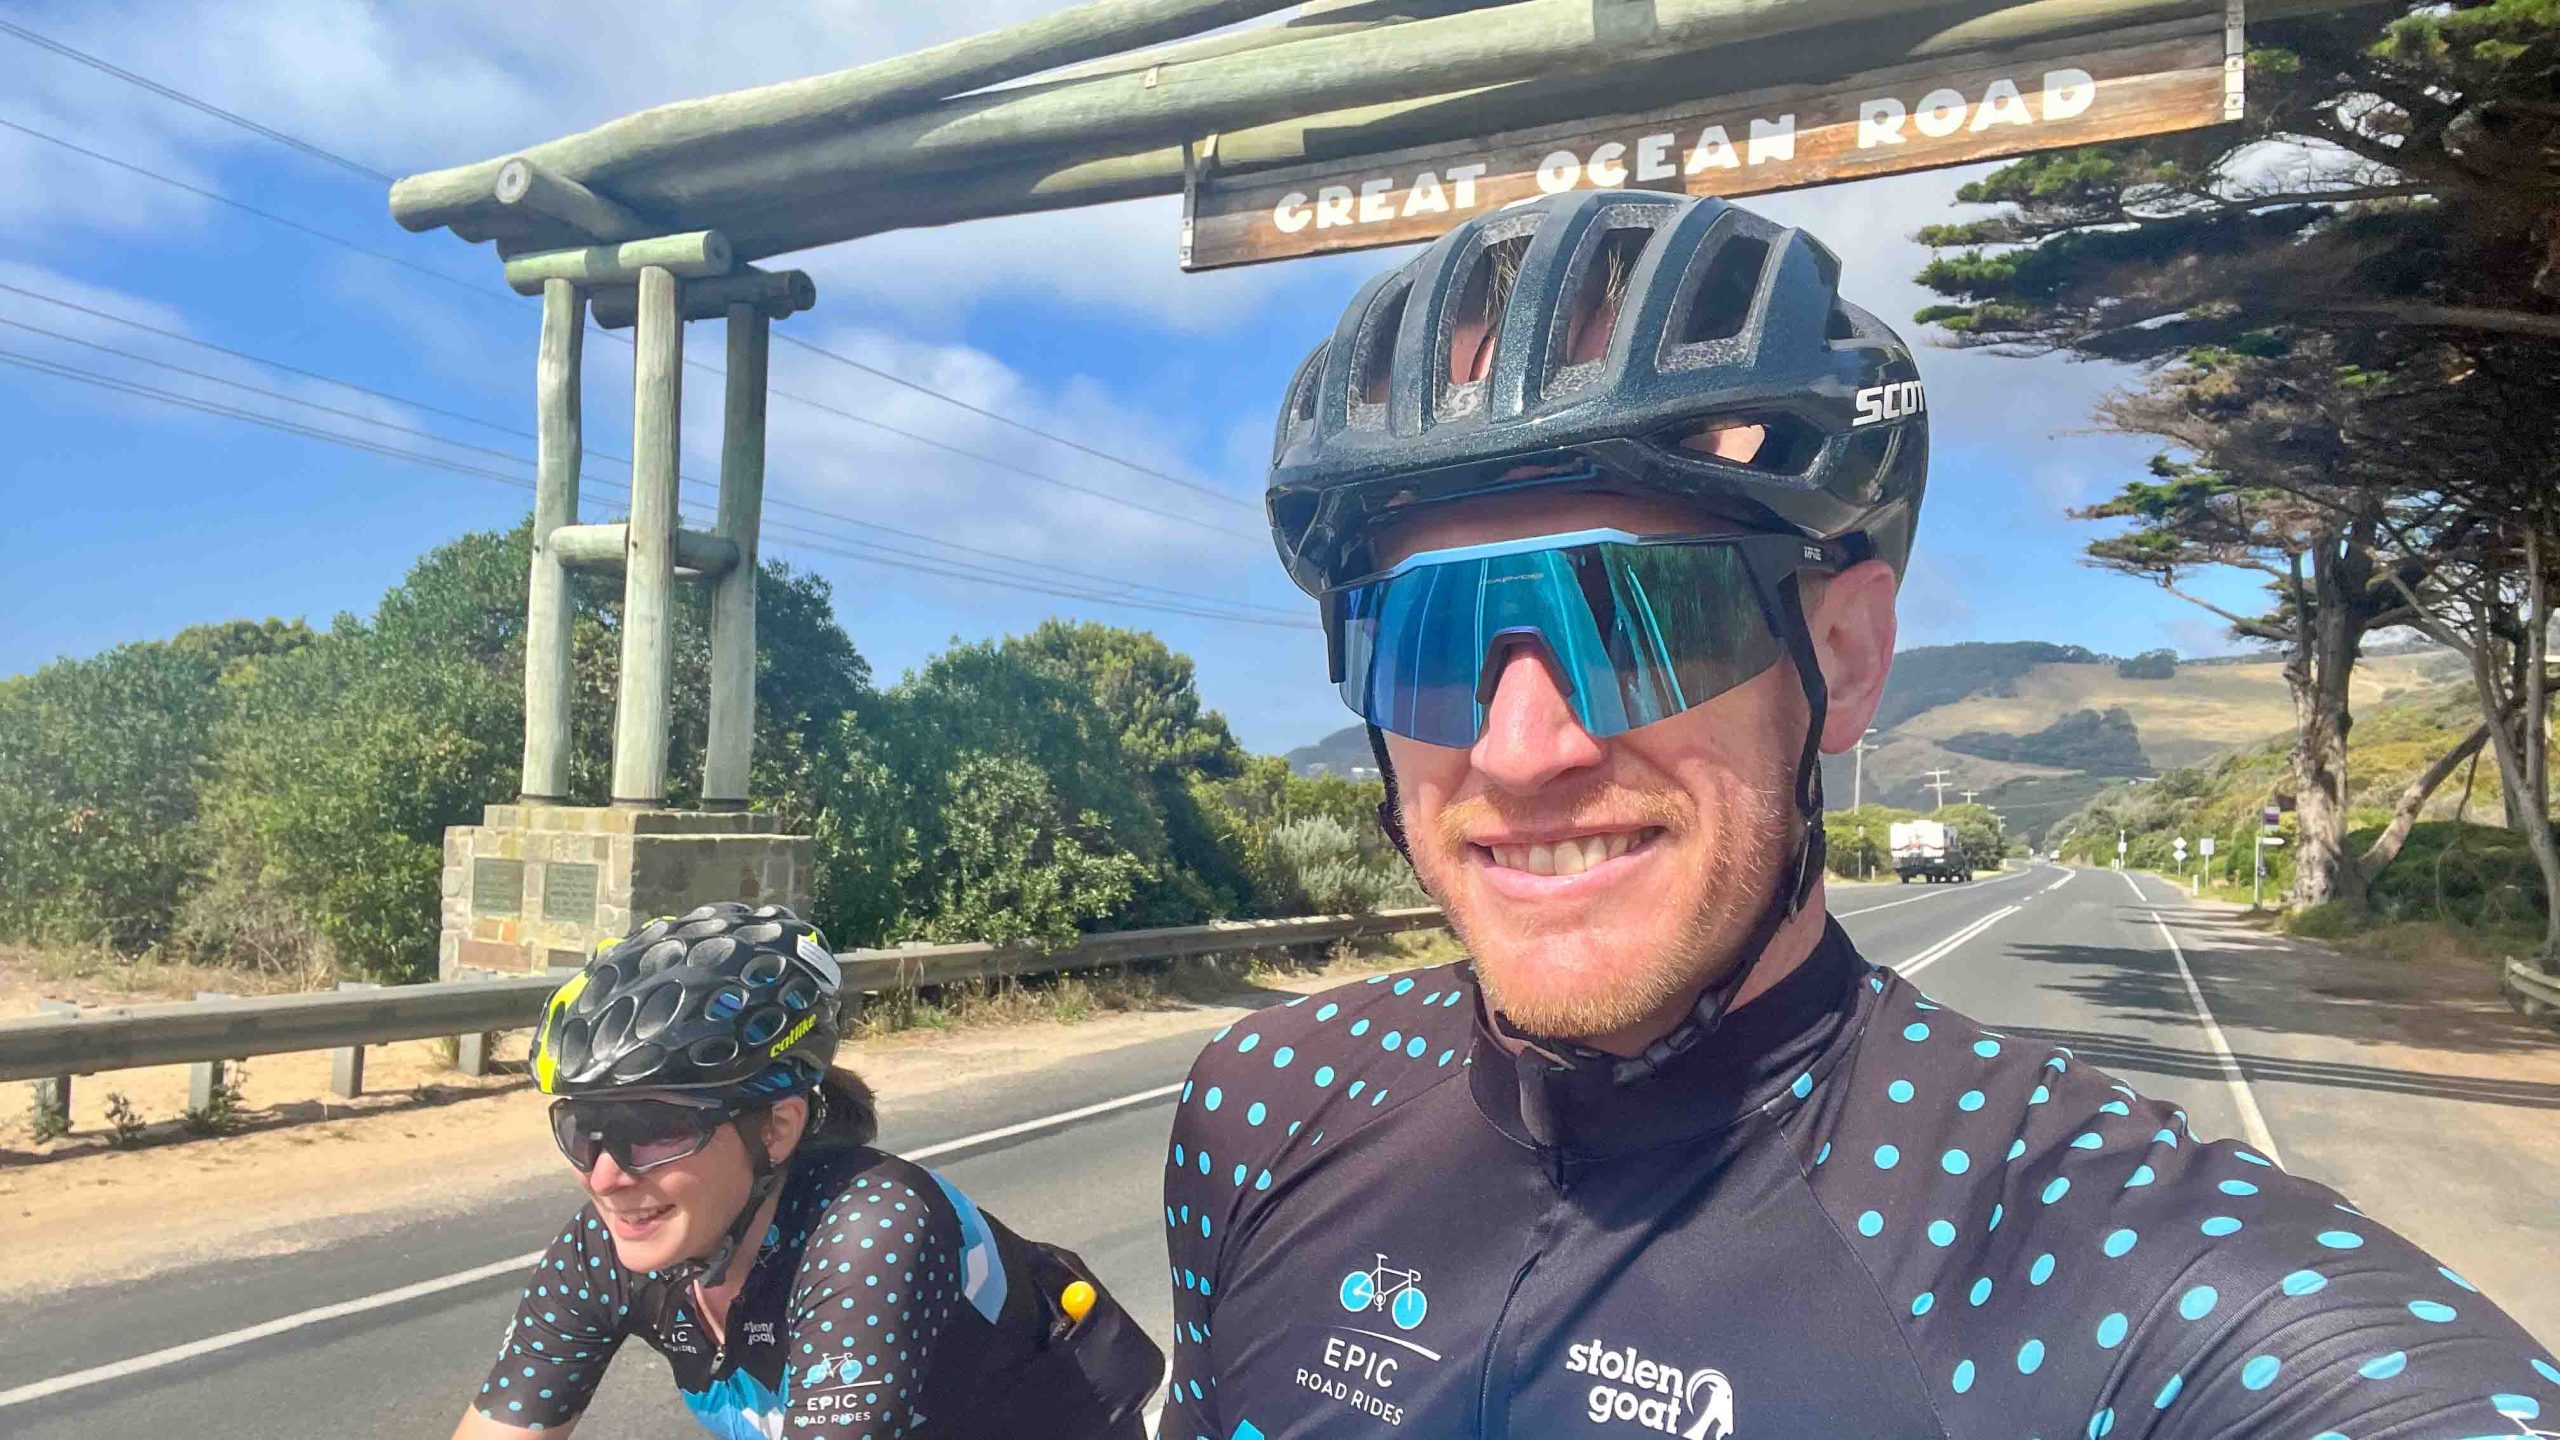 Cyclists at Great Ocean Road arch